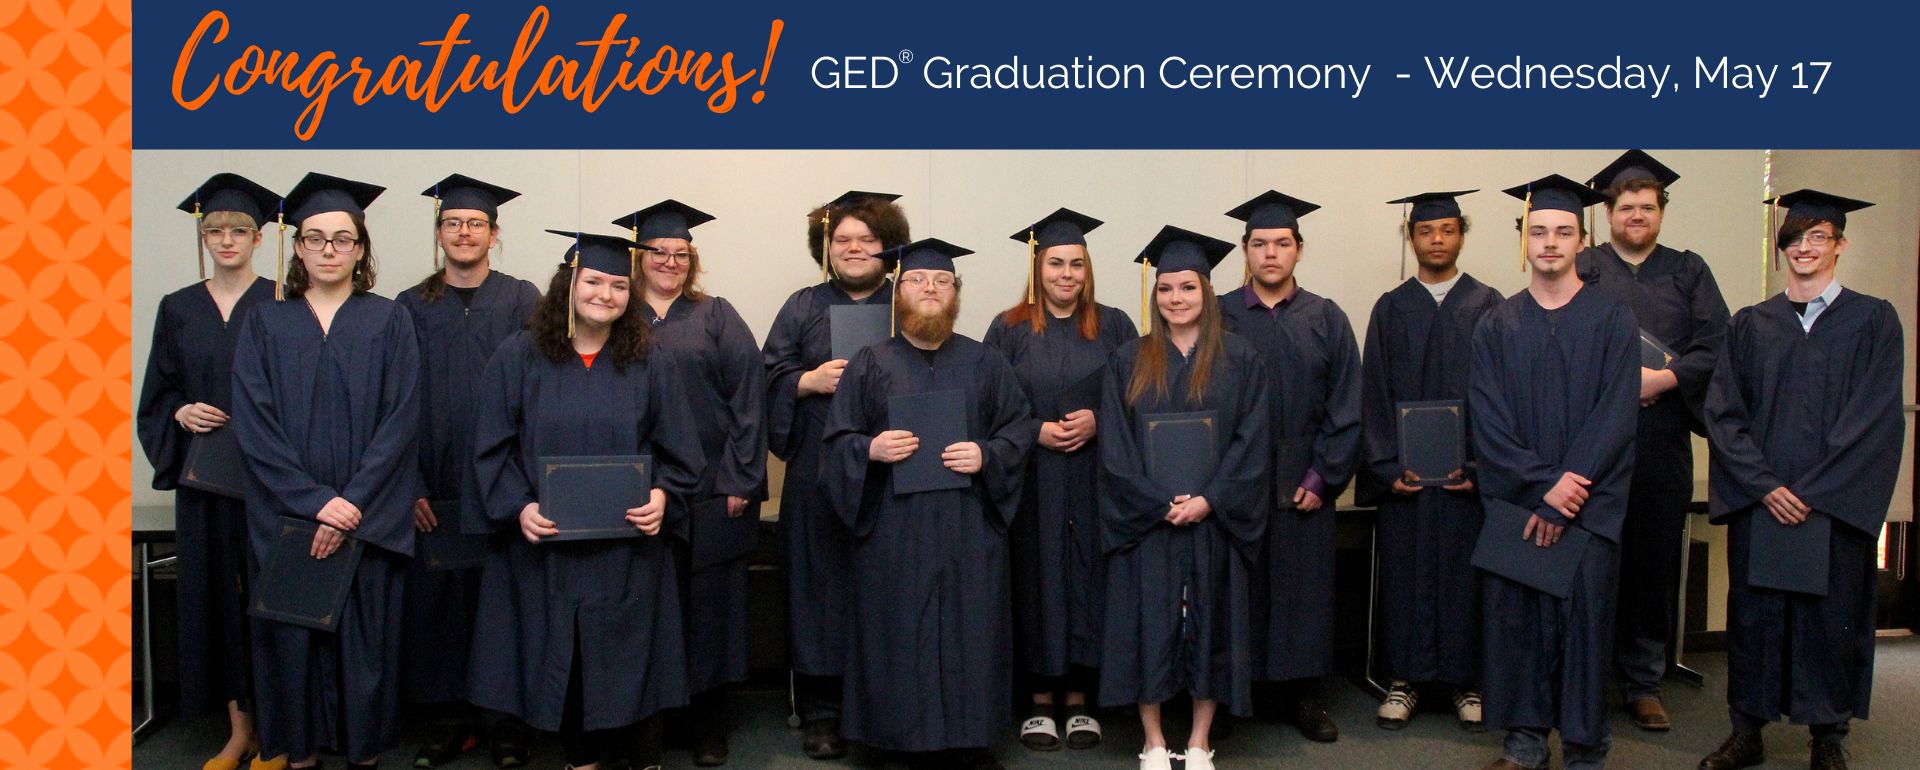 Congratulations GED Graduation Ceremony Wednesday, May 17. A photo of the graduates is in the photo space.